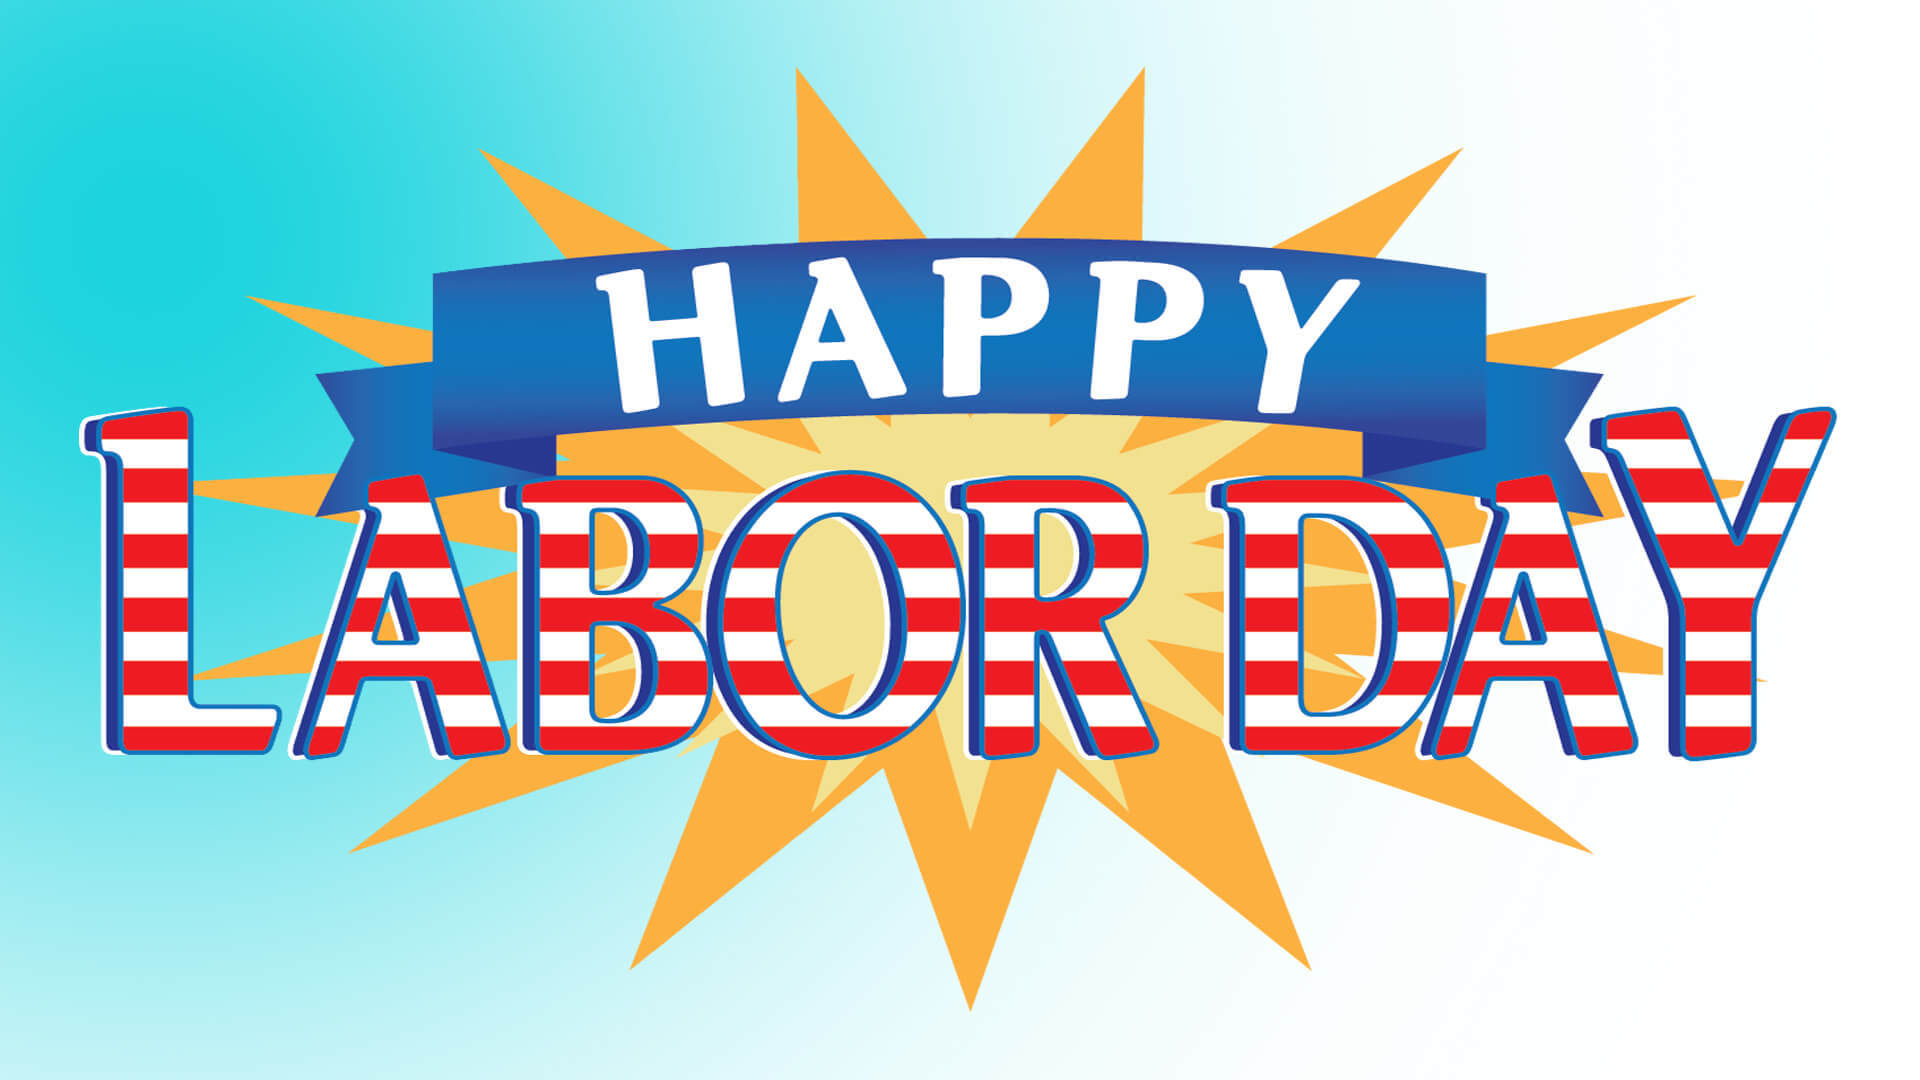 Labor Day Holiday, Labor day wallpapers, Photos, Backgrounds, 1920x1080 Full HD Desktop